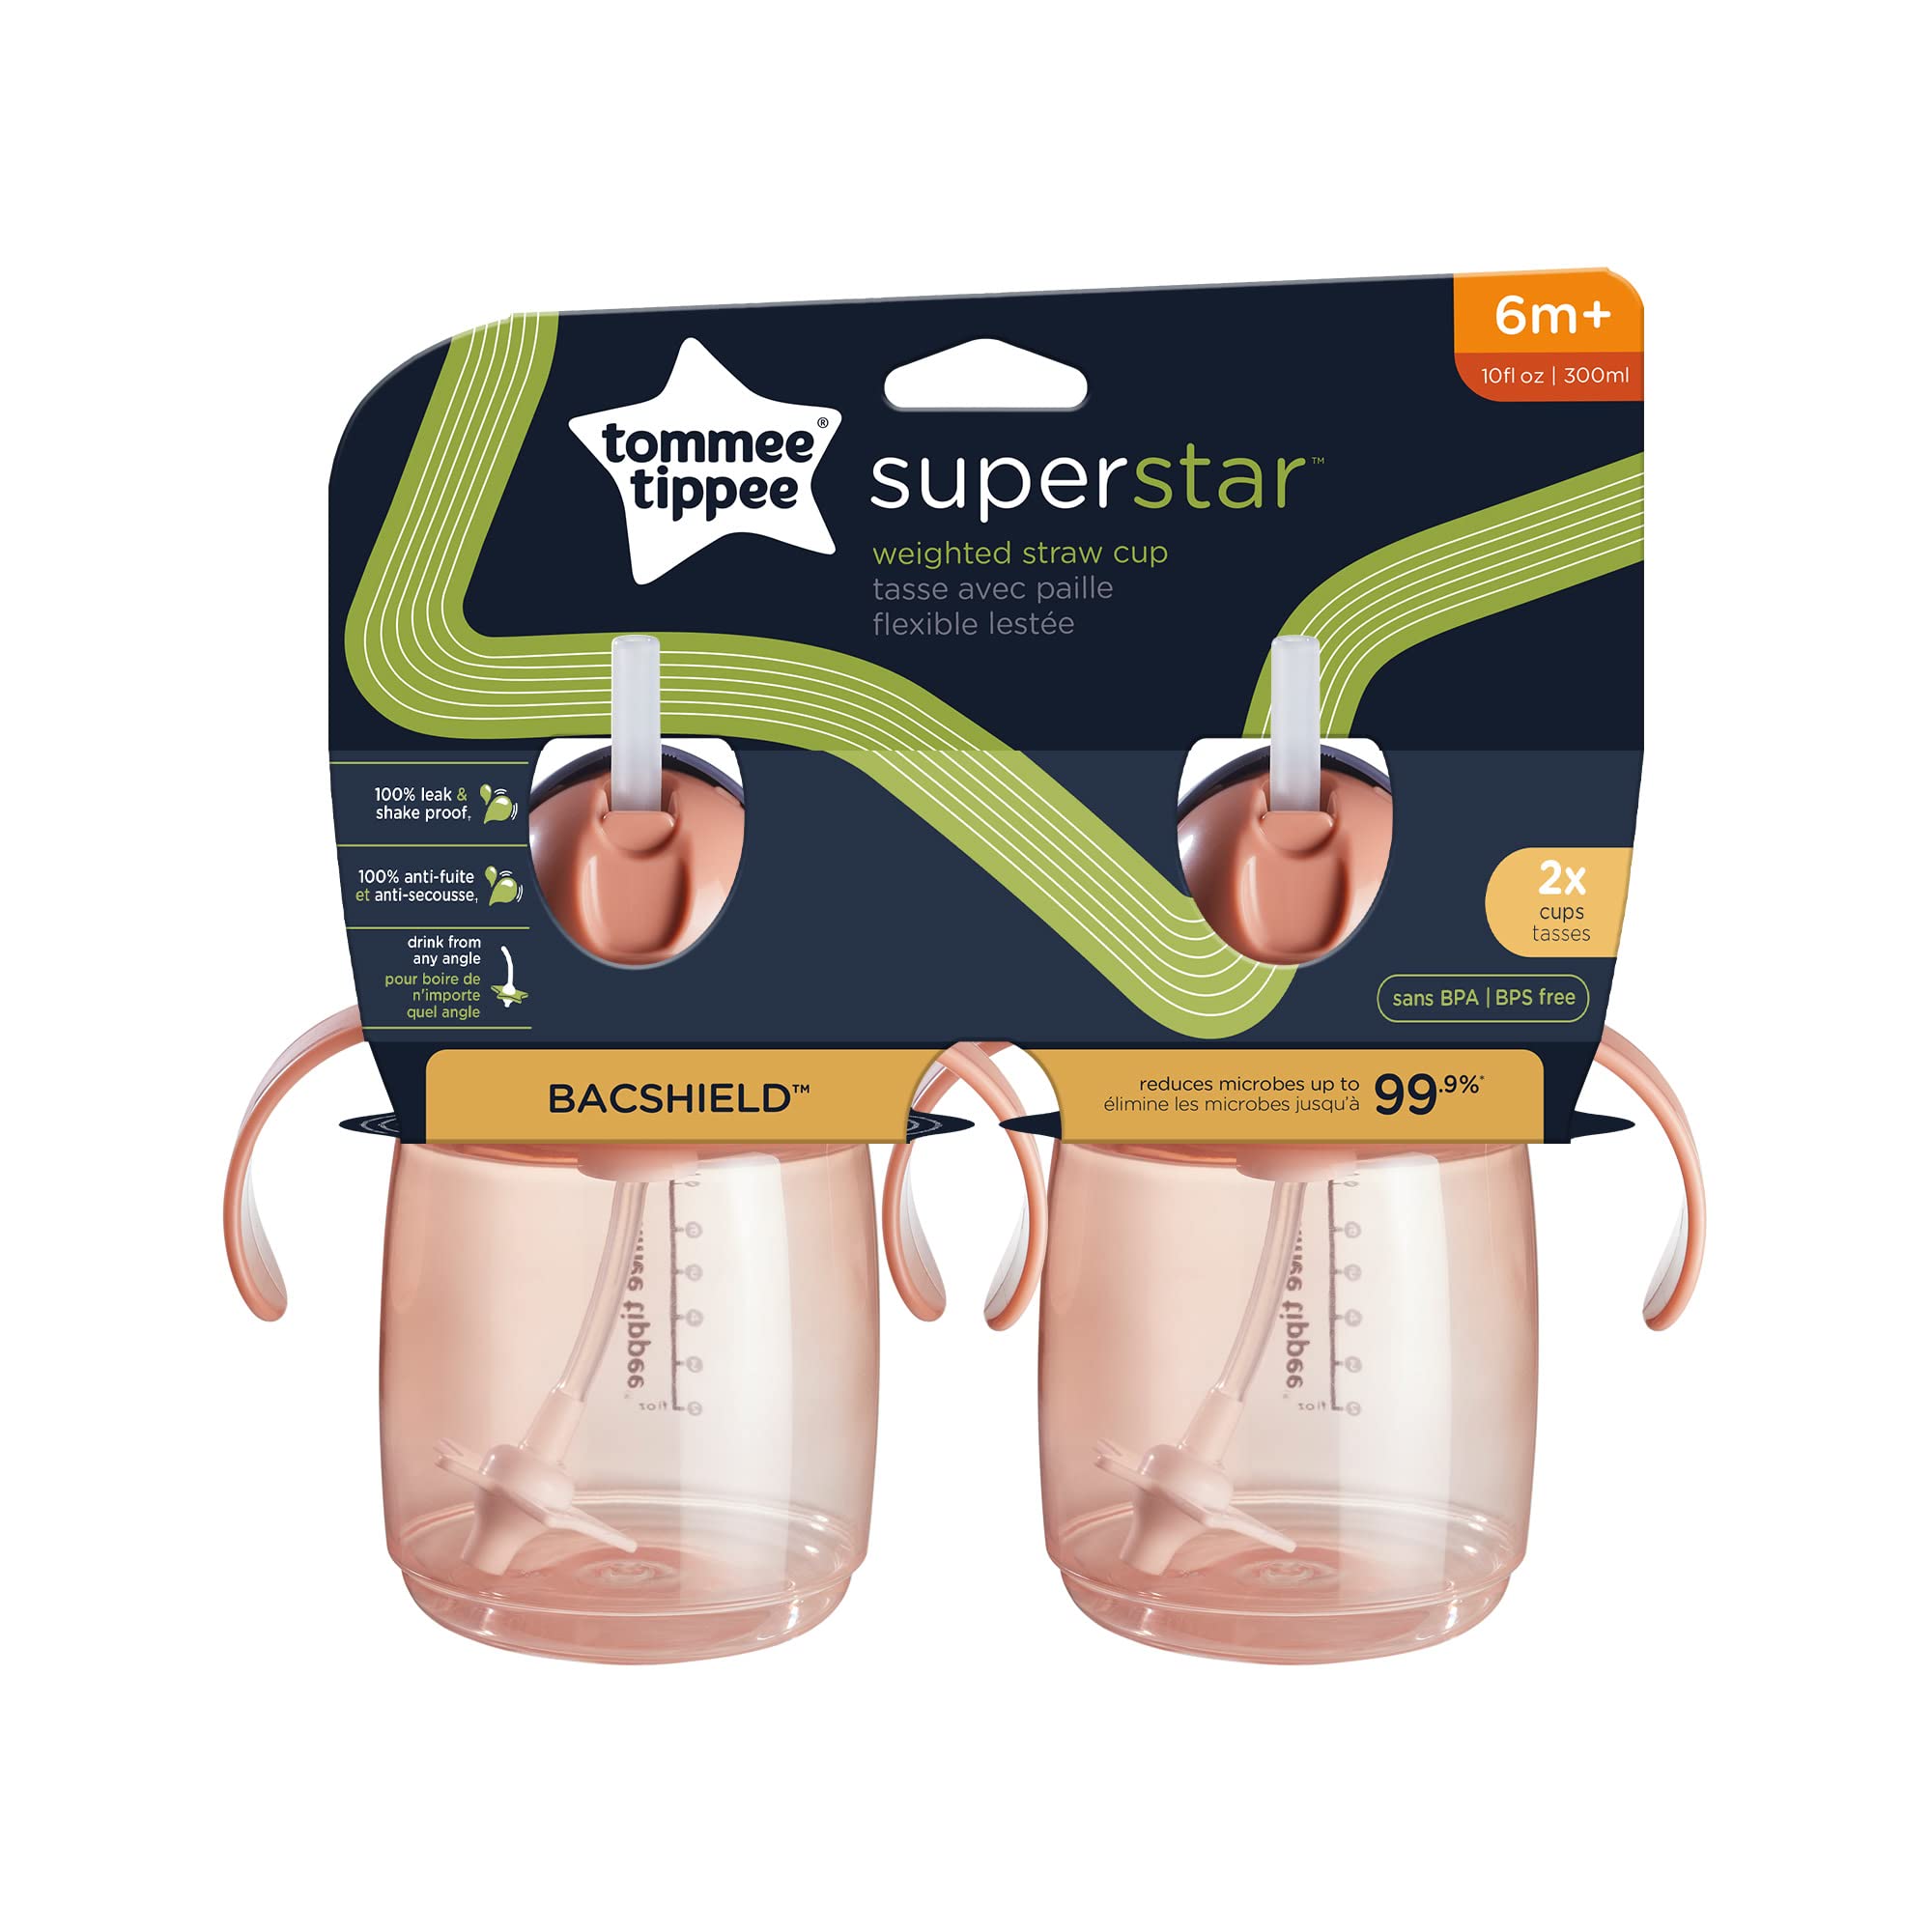 Tommee Tippee Superstar Weighted Straw Cup for Toddlers, 6 months+, 10oz, Shake and Spill-Proof, Antimicrobial Straw, Pack of 2, Pink